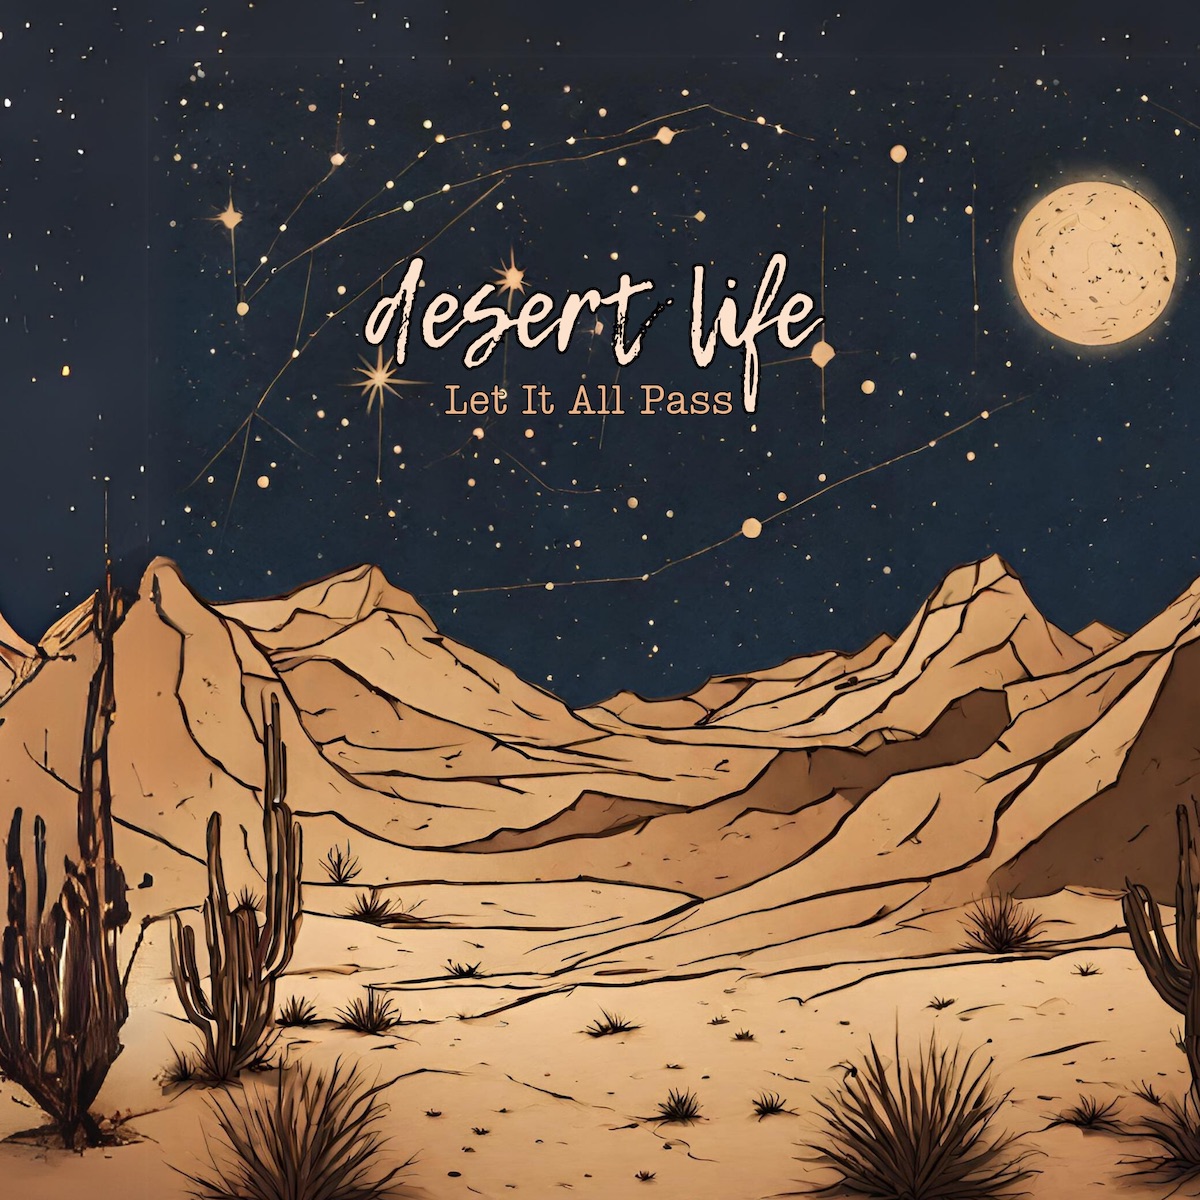 DEBUT ALBUM REVIEW: Let It All Pass by Desert Life